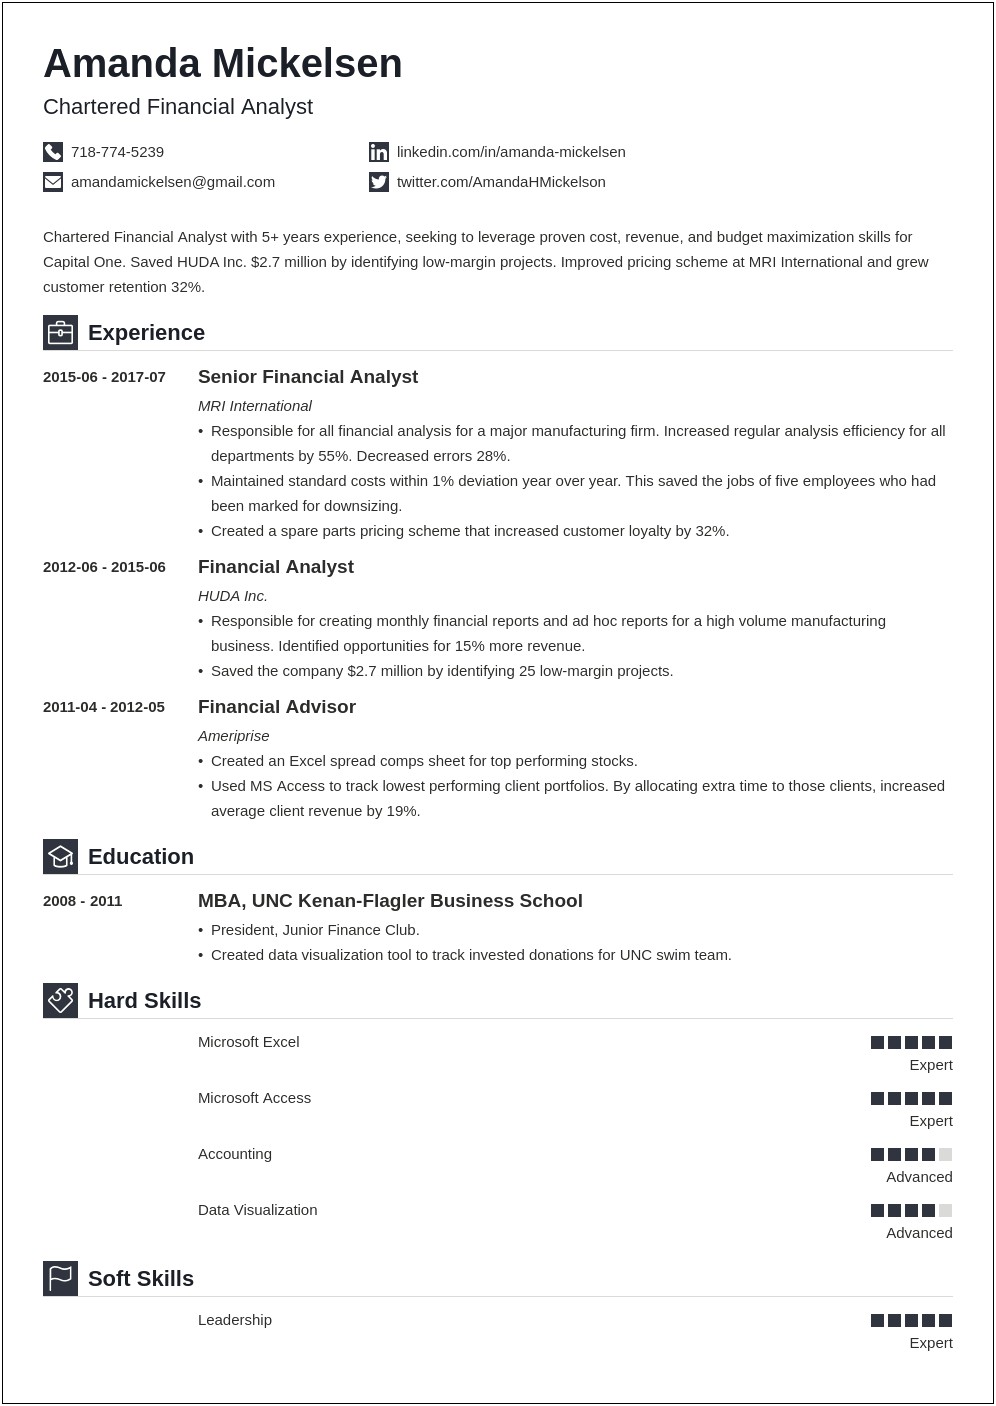 Resume Summary Statement For Various Financial Jobs